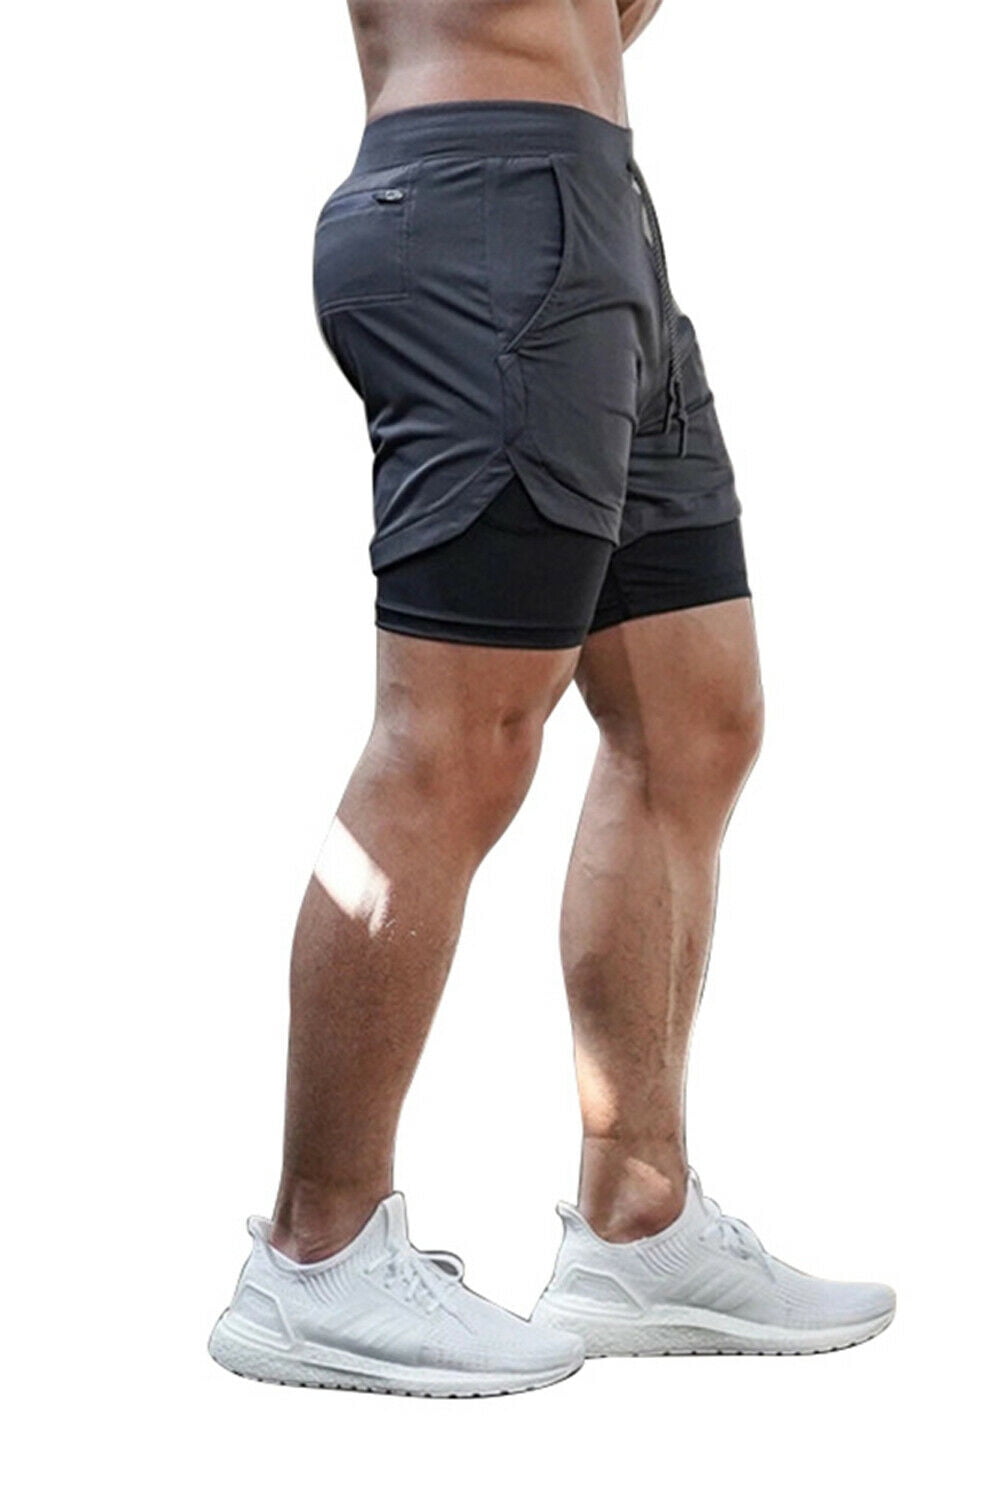 Buy Men'S Polyester 2-In-1 Workout Gym Shorts - Grey Online